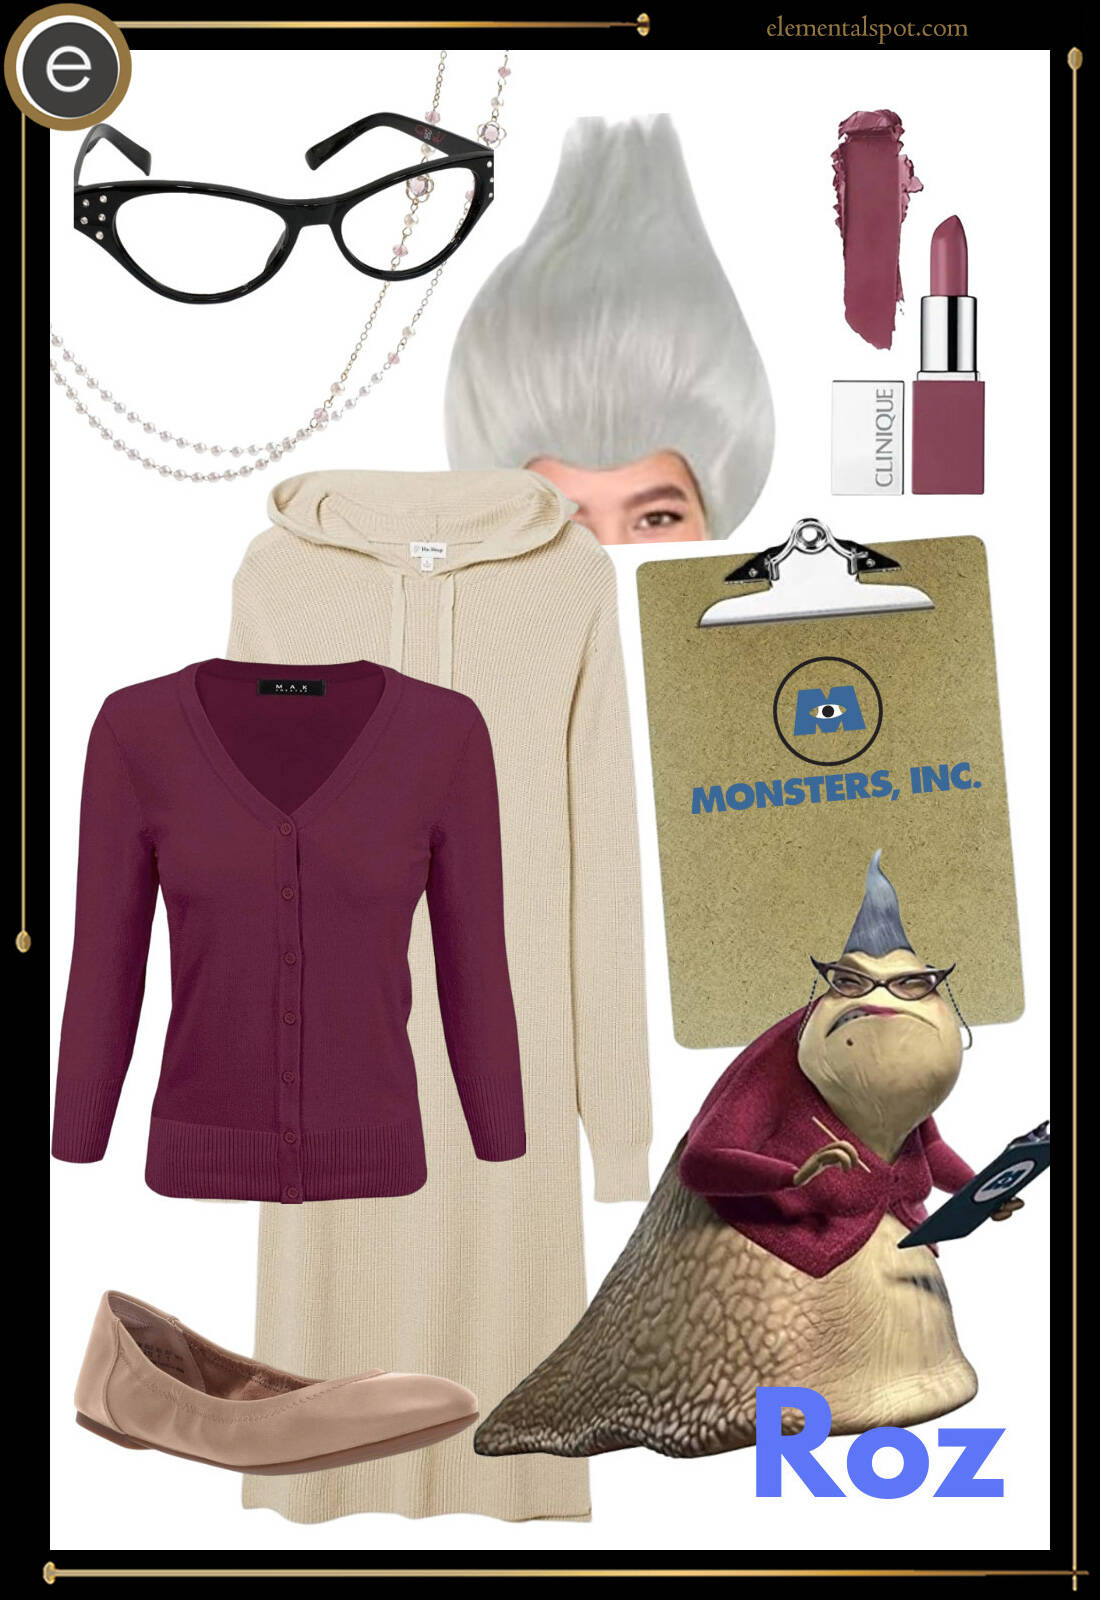 costume or Outfit-Roz-Monsters Inc